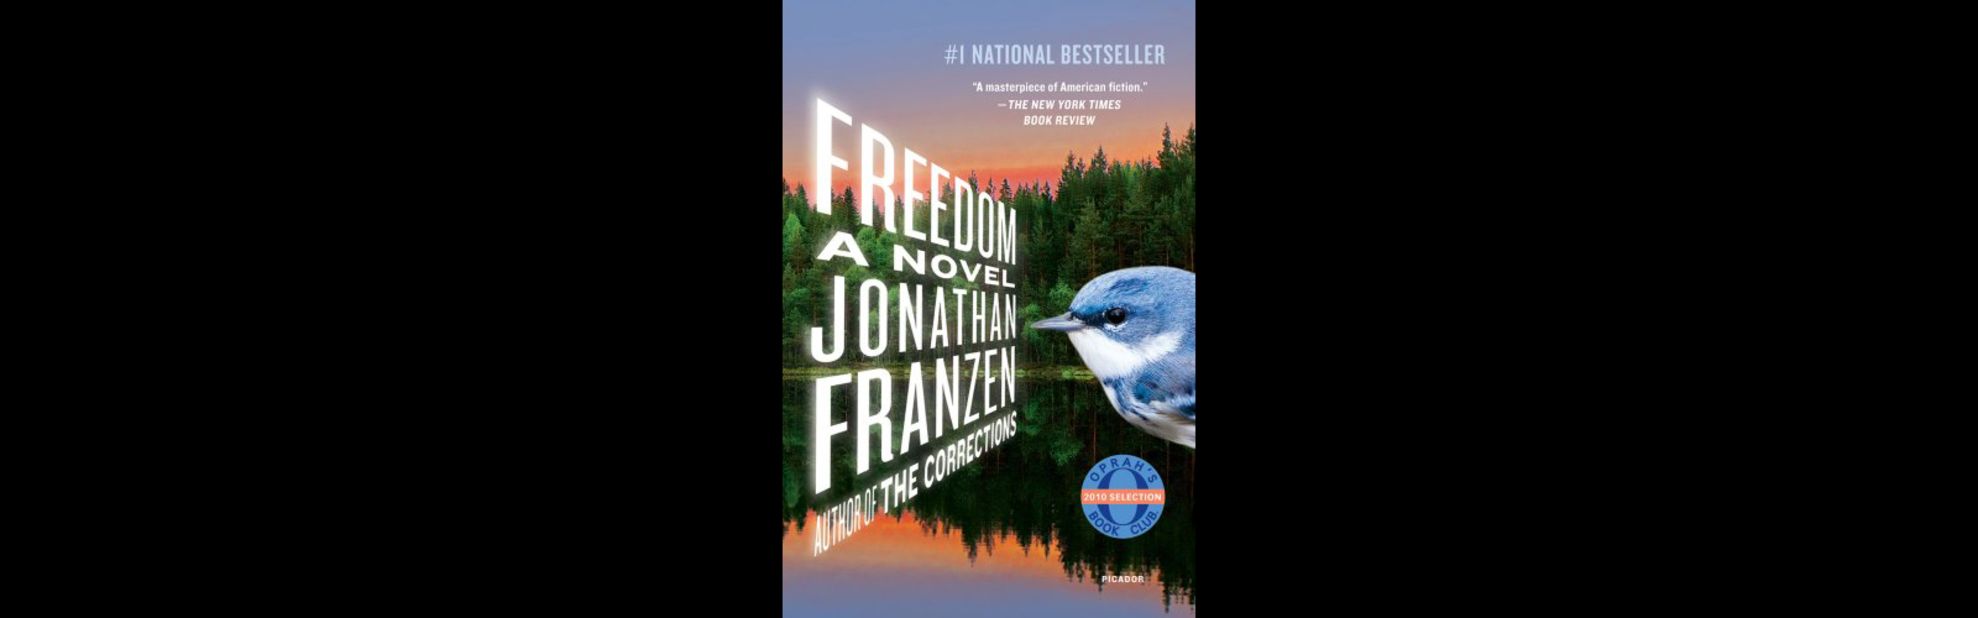 Jonathan Franzen's "The Corrections" has been in and out of development hell for years, even canceled at the eleventh hour by HBO; his 2010 best-seller, "Freedom," about an American family torn by politics and culture, has been optioned by Scott Rudin.